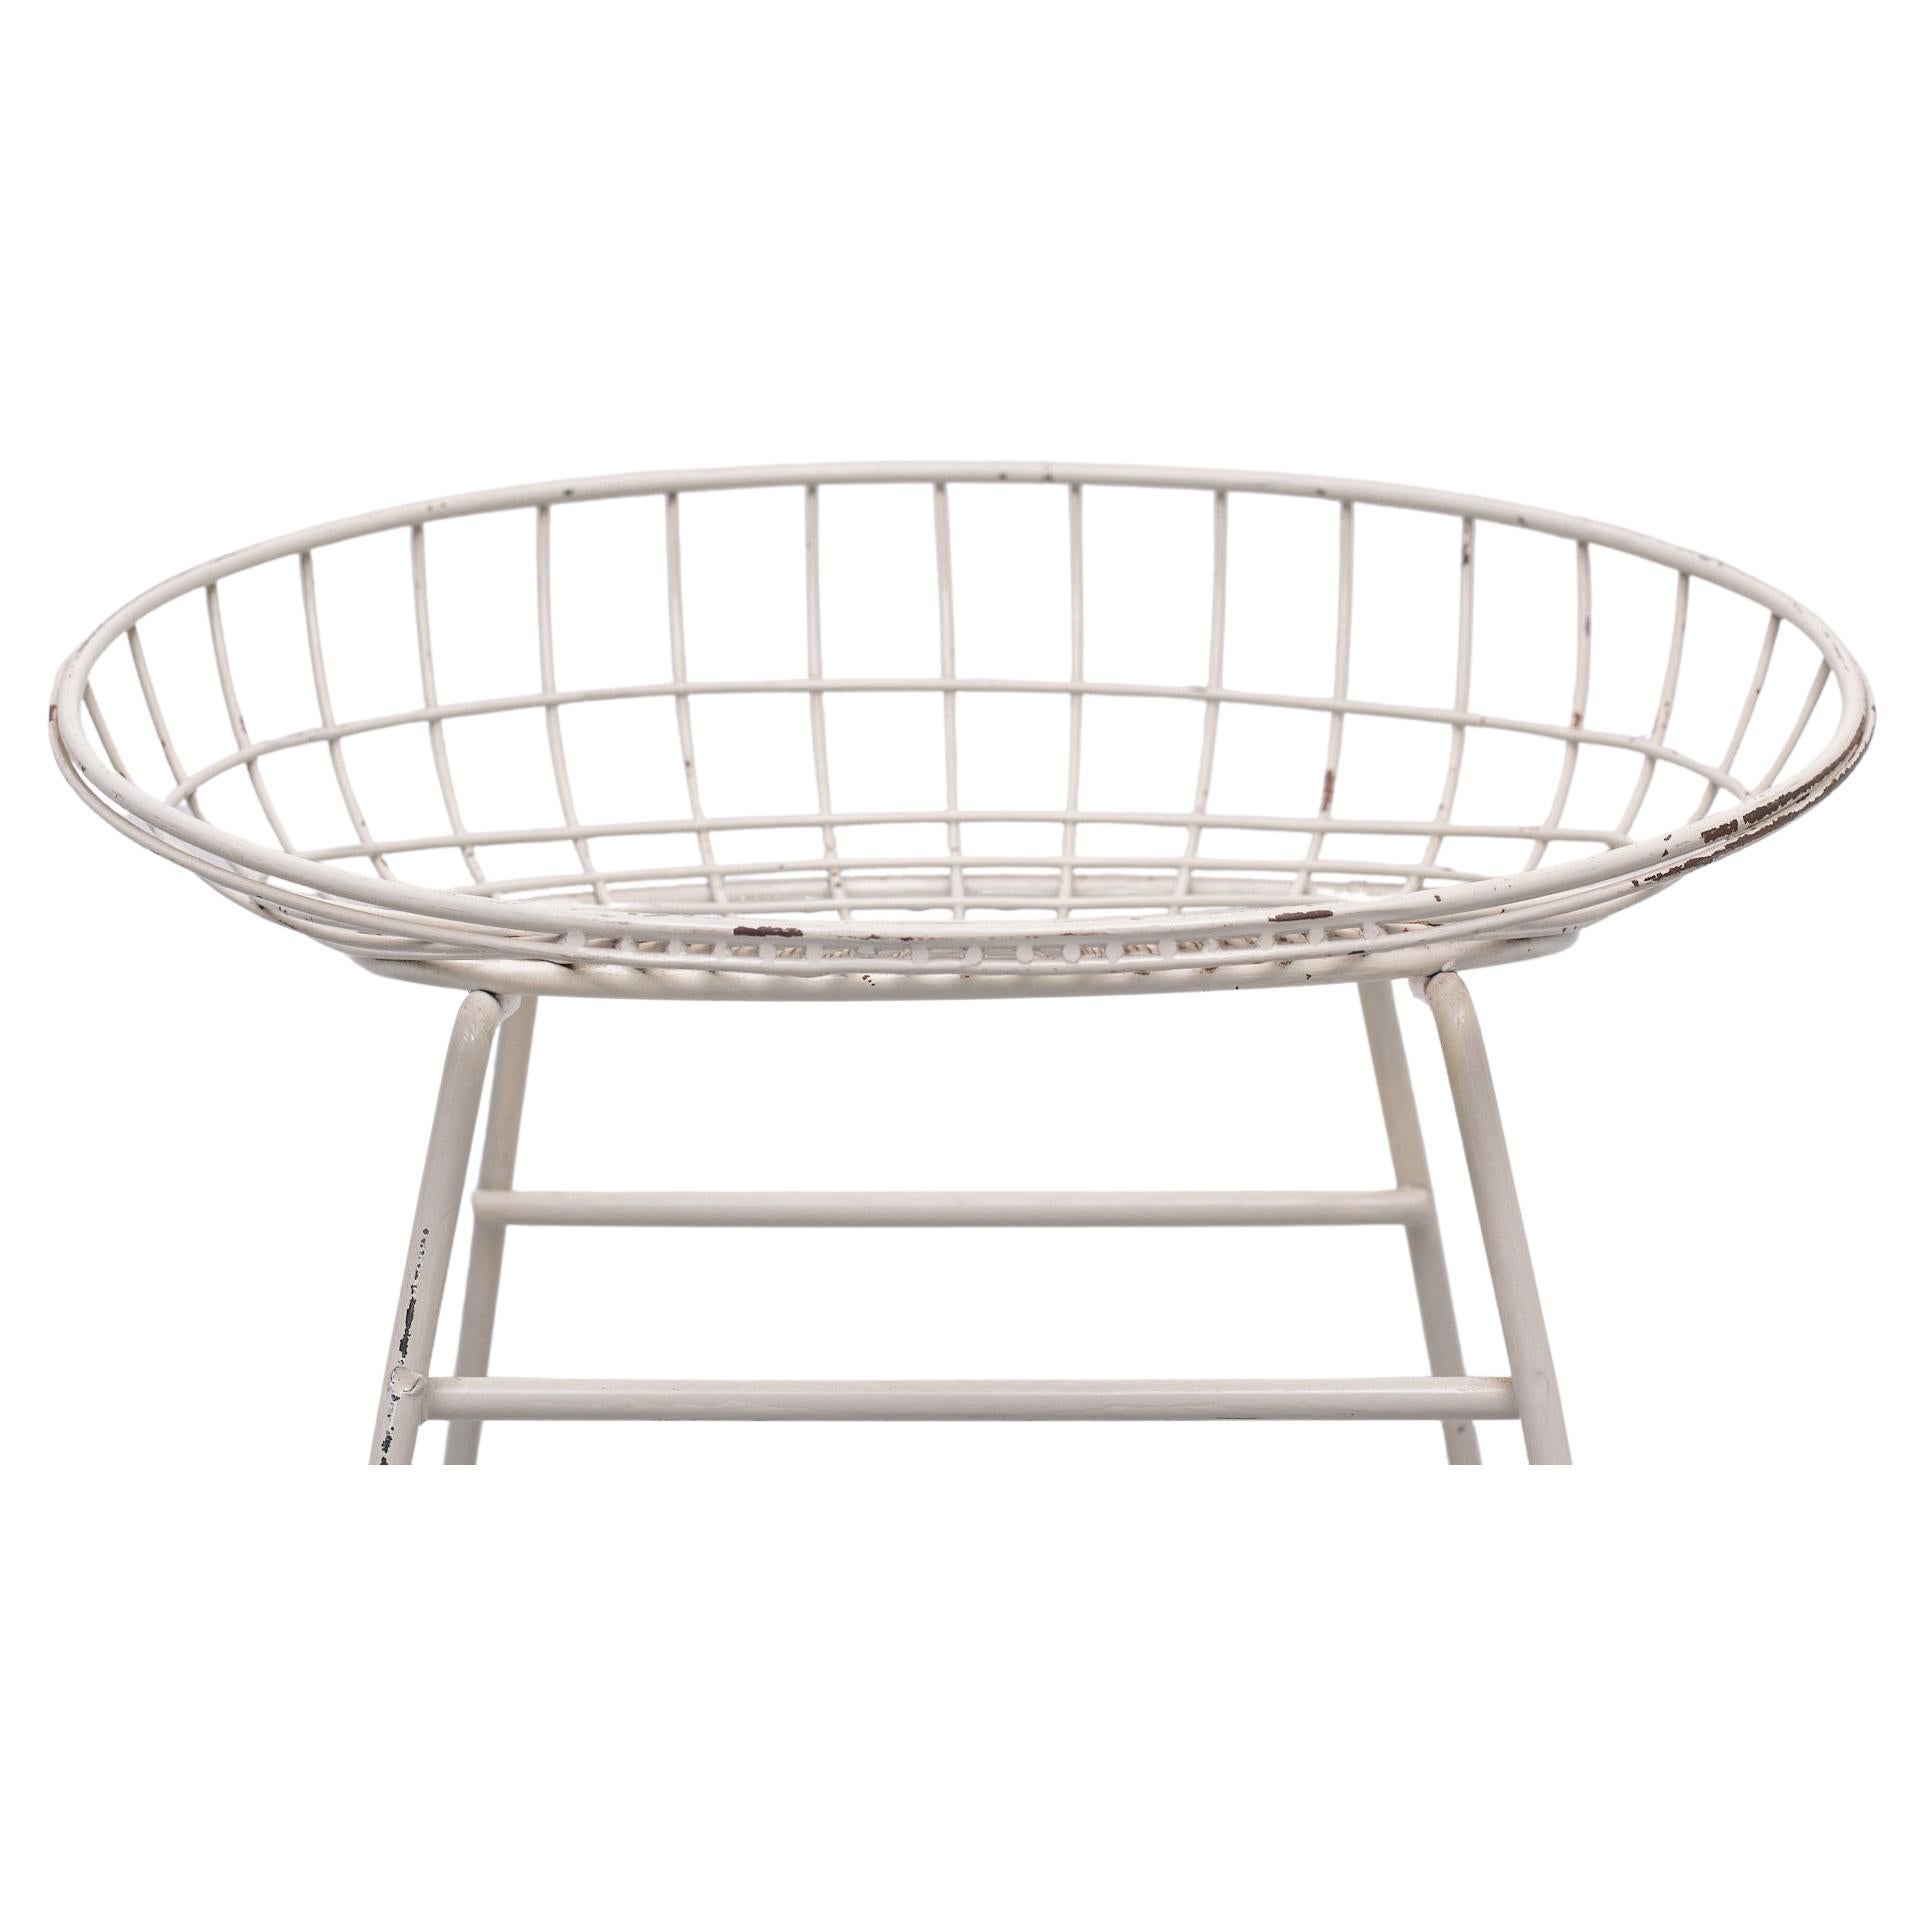 Pastoe Wire Stool Model Km05, Cees Braakman 1950s  In Good Condition For Sale In Den Haag, NL